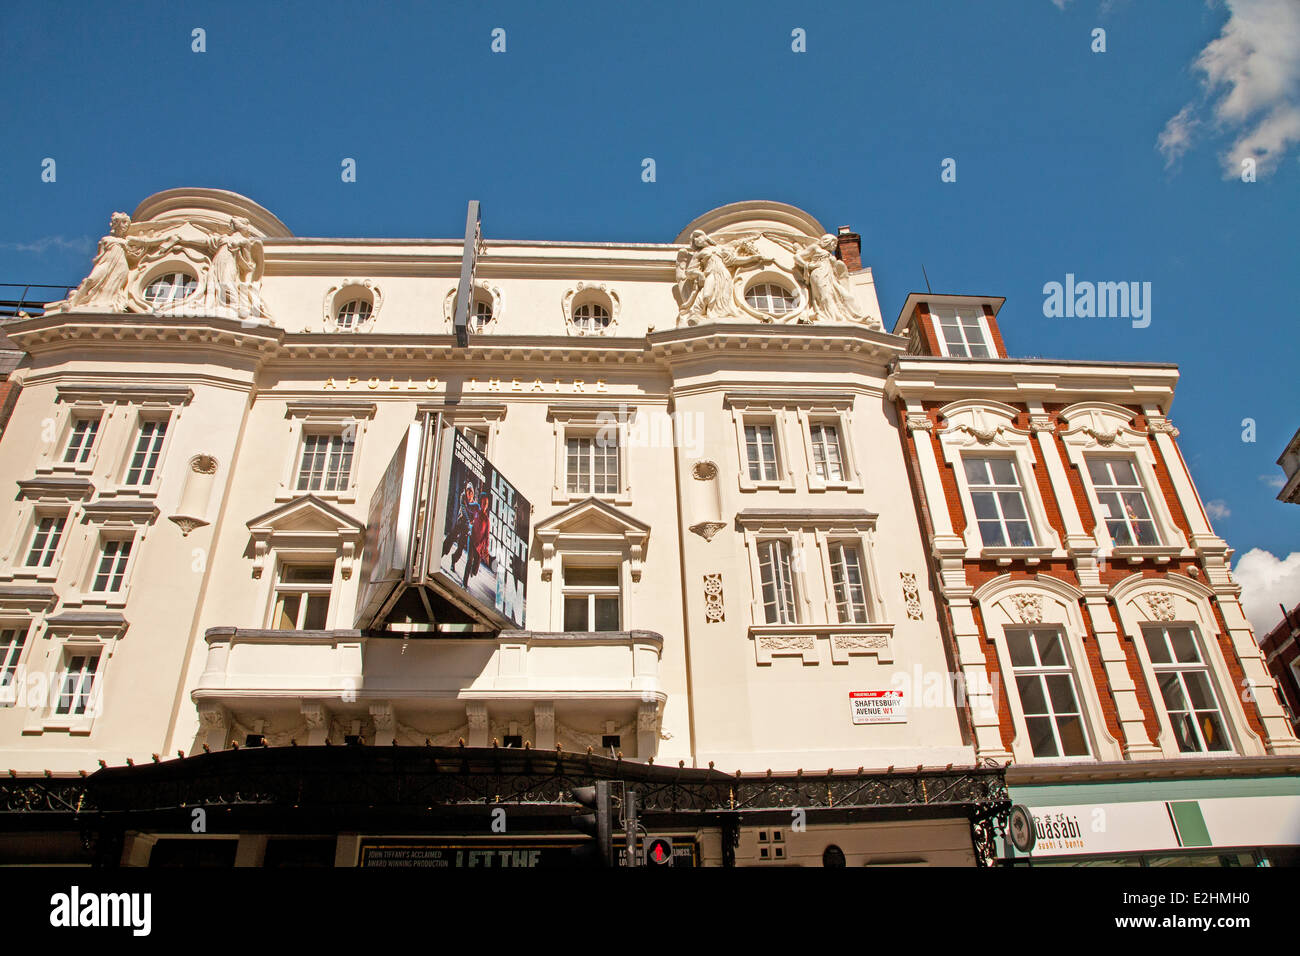 Theatreland, Shaftesbury Avenue, Londres, Angleterre Banque D'Images